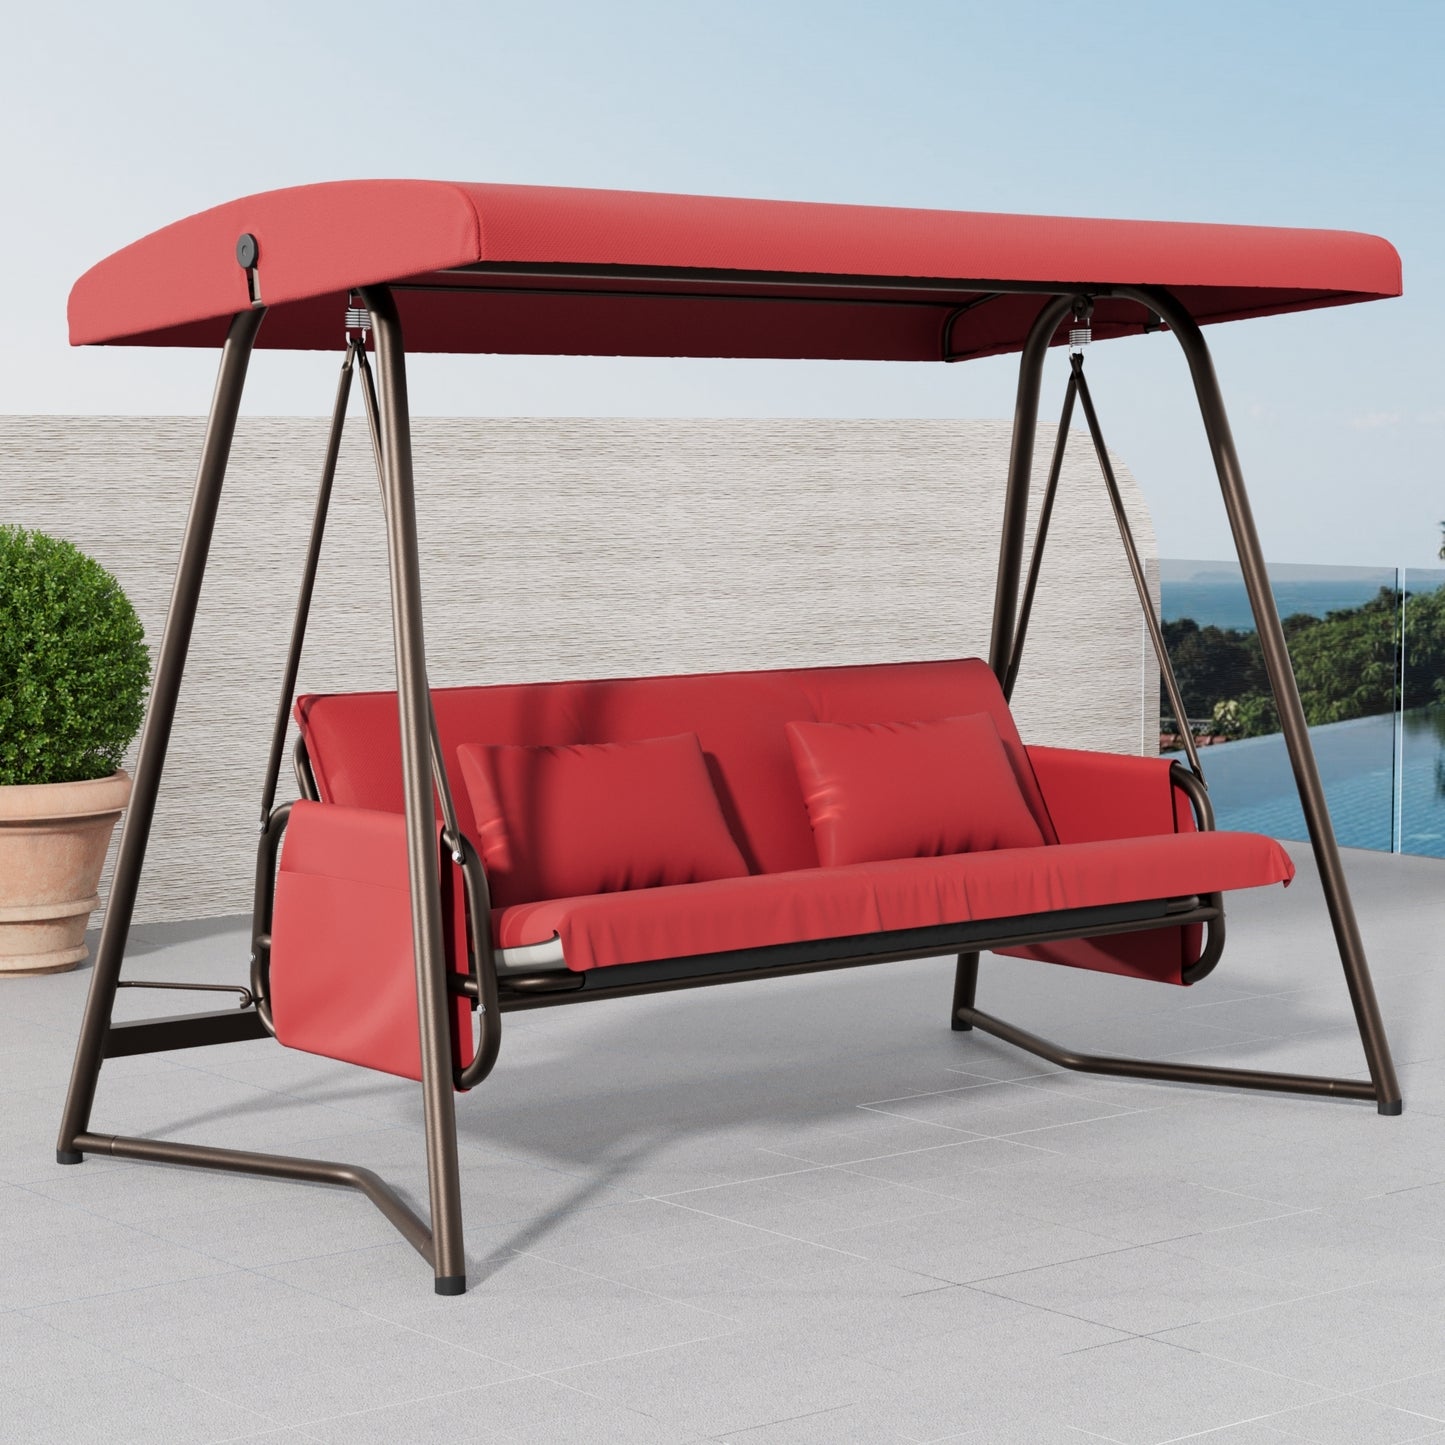 Outdoor Patio Swing Chair, bed, Cushion, Canopy